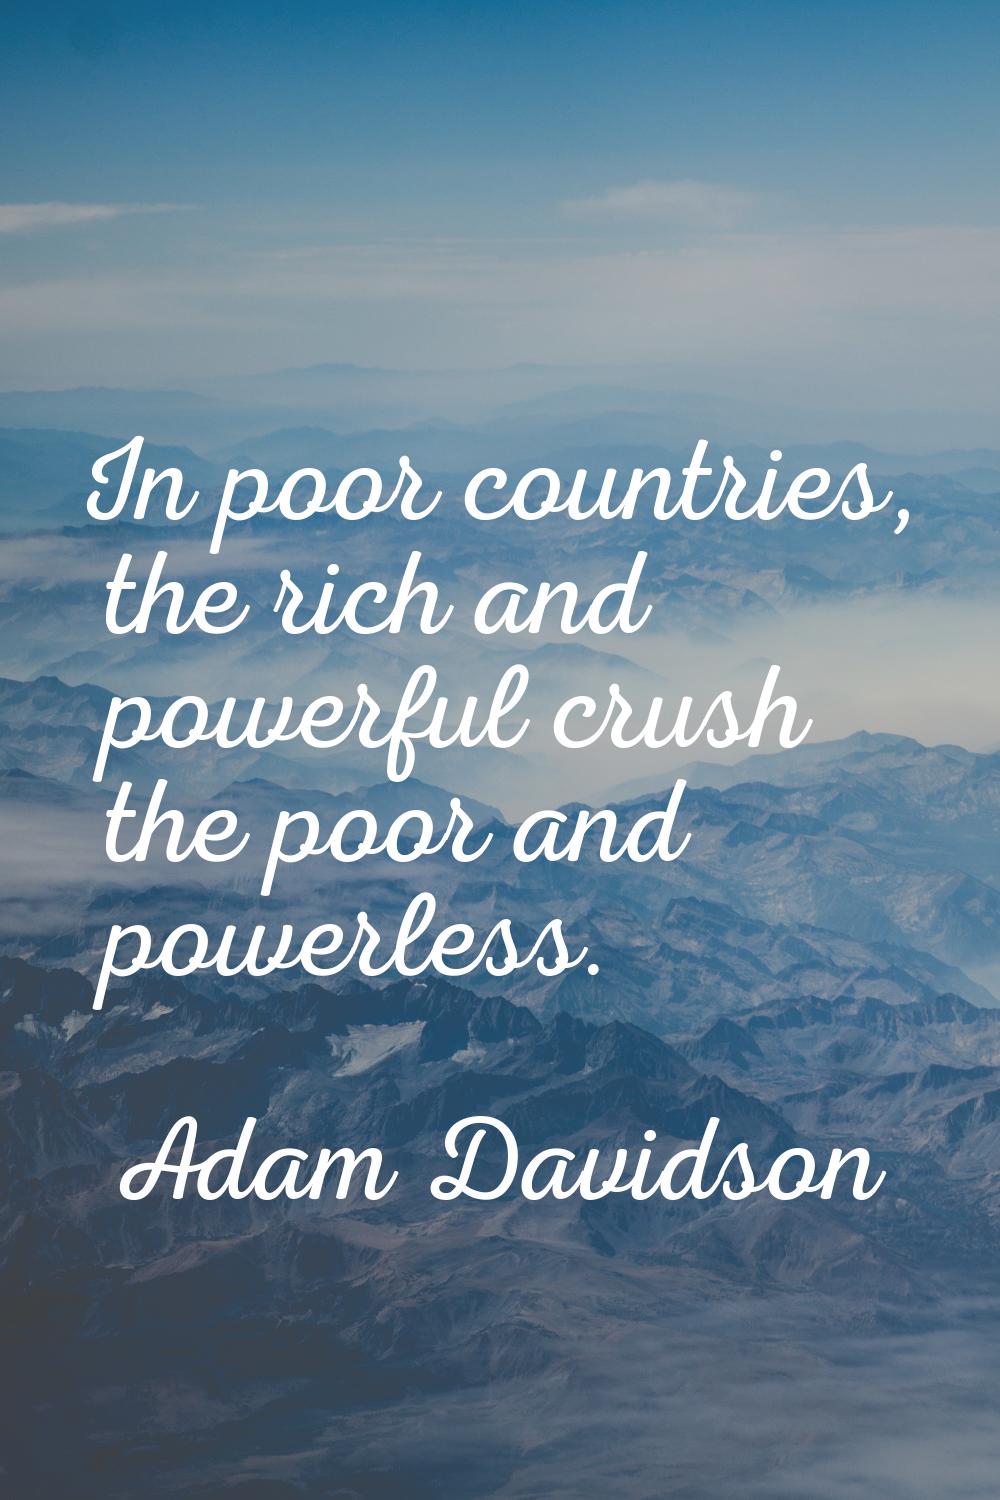 In poor countries, the rich and powerful crush the poor and powerless.